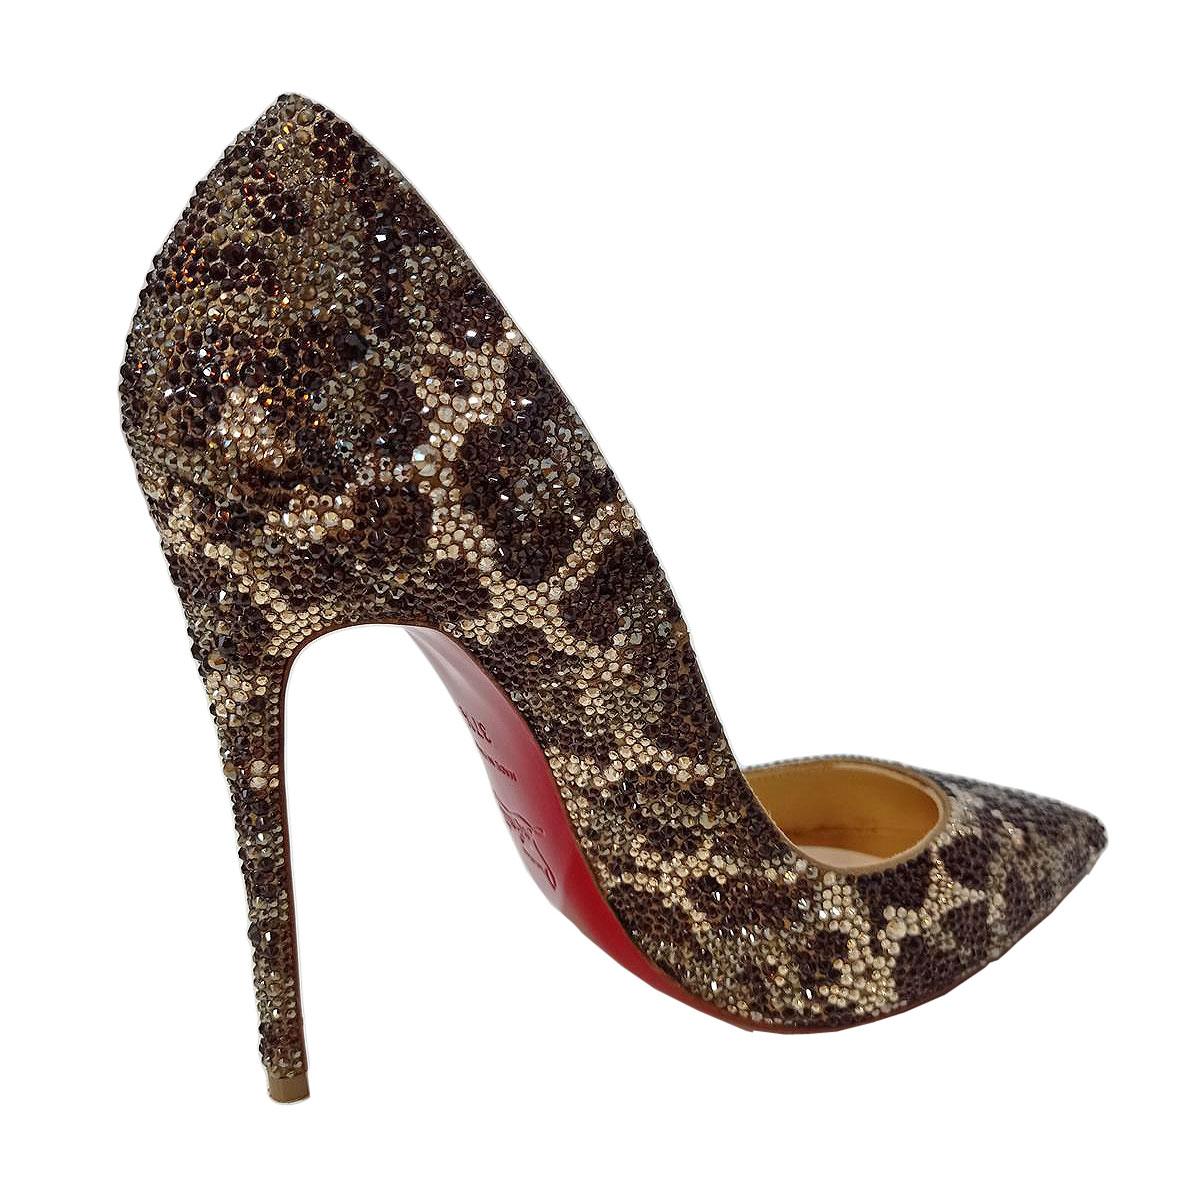 Iconic So Kate pointed pumps
Leather incrusted with crystals
Leopard fancy
Heel height cm 12 (4,72 inches)
With dustbag

Original price € 2000
Worldwide express shipping included in the price !